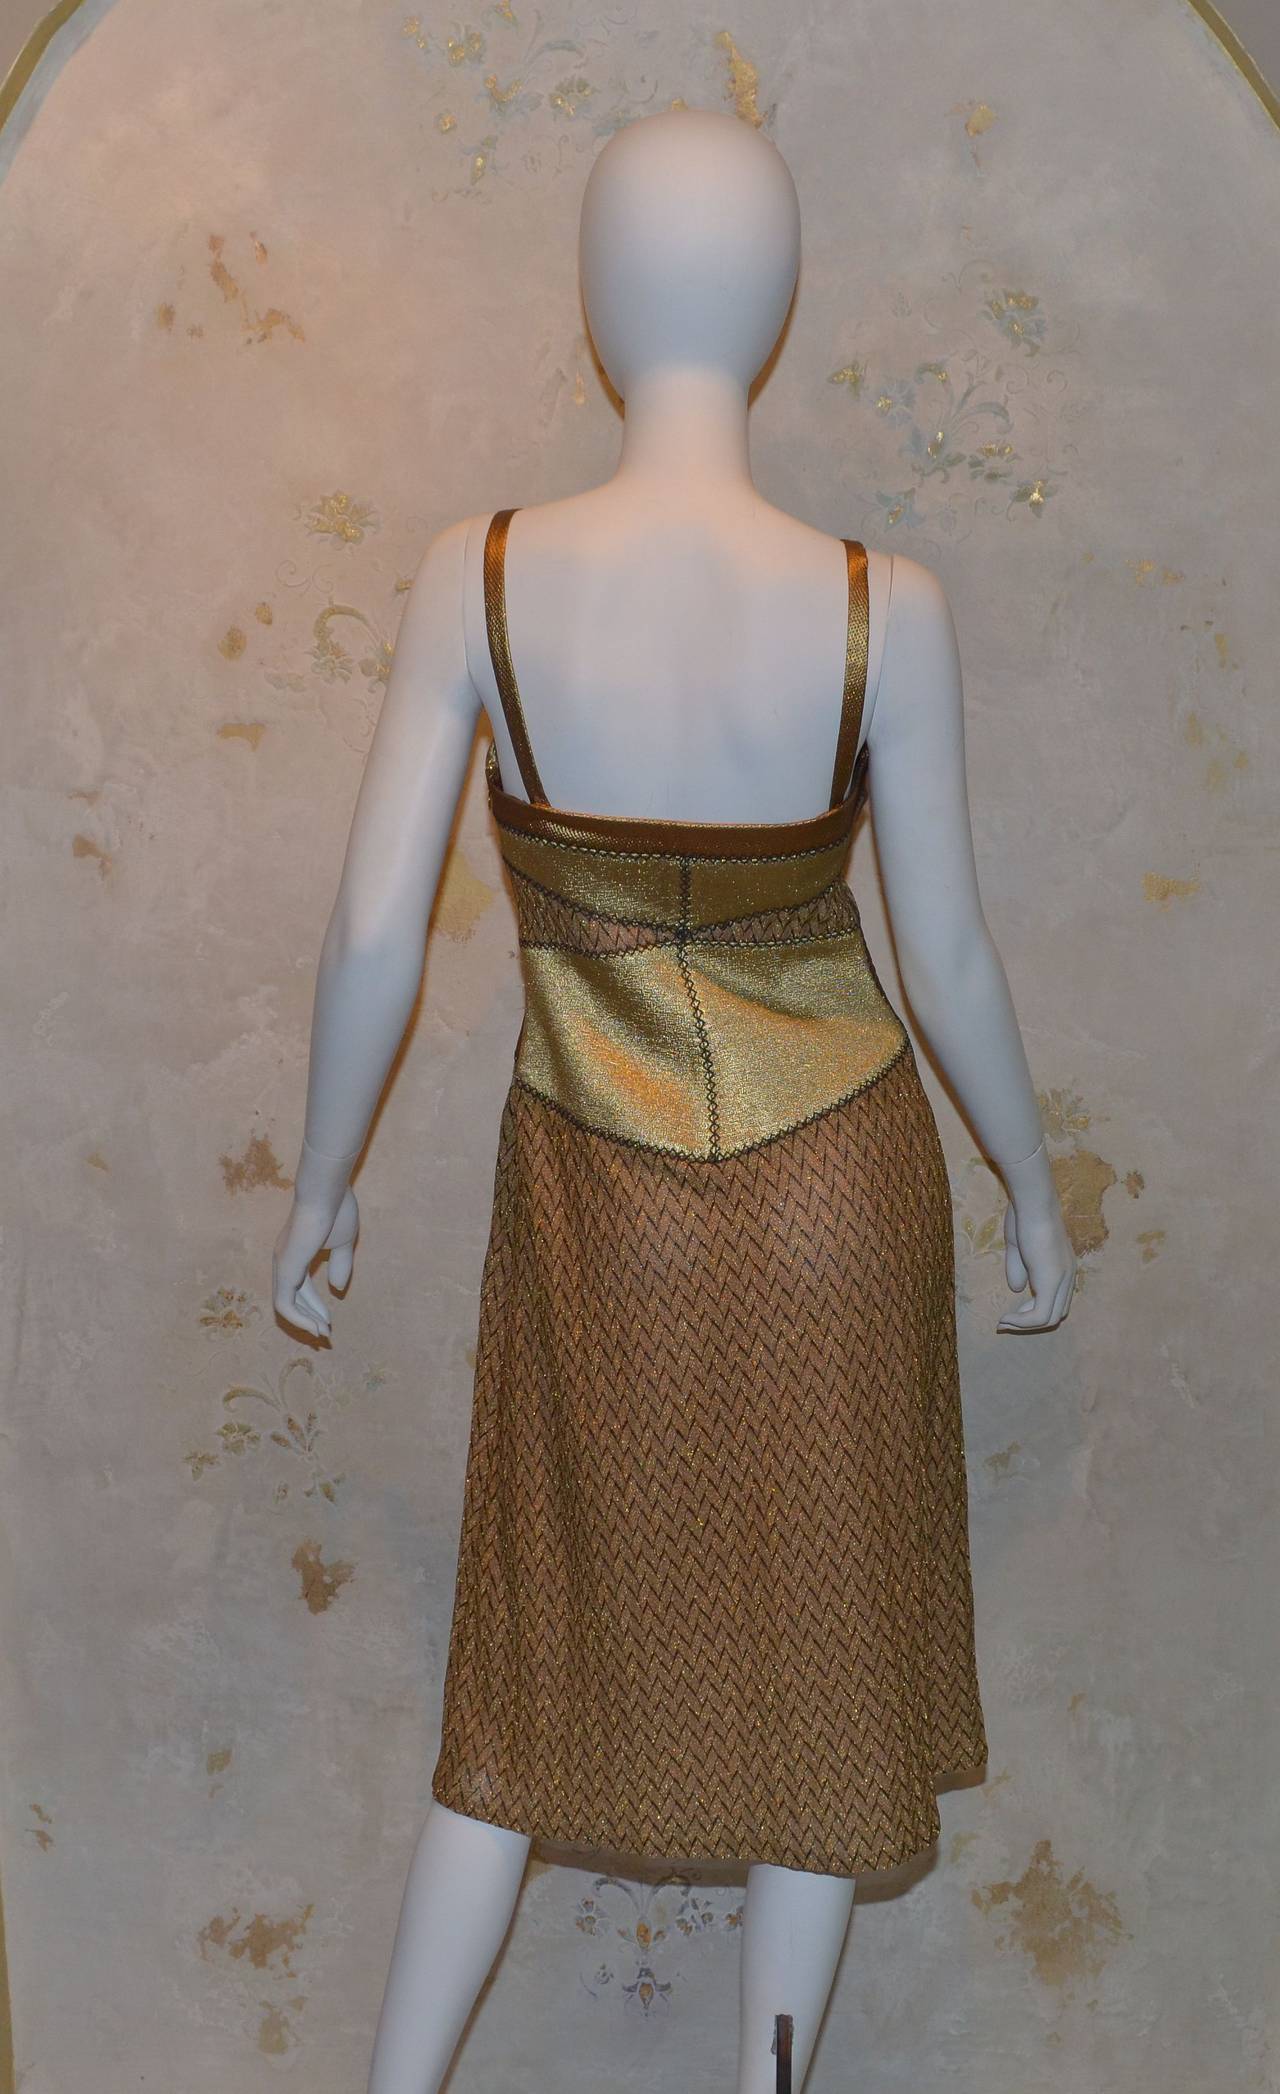 Missoni knit dress made in Italy. Dress is marked a size 42 and has a side zipper closure. Flat shoulder straps are optional and dress can be worn strapless. 61% rayon, 25% rayon cupro, and 14% polyester. Fully lined in 91% silk and 9% elastane.